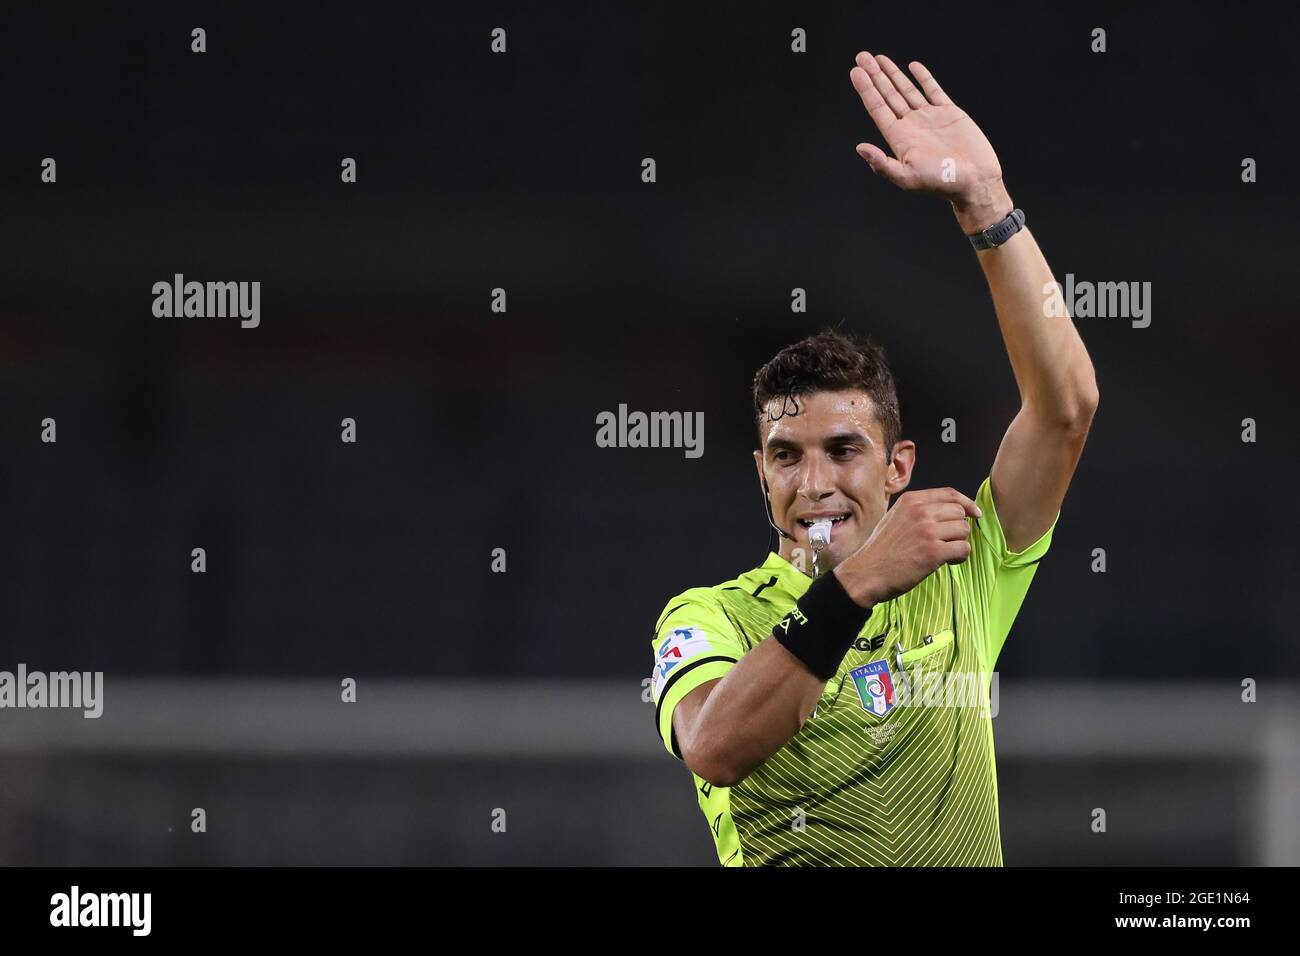 Turin, Italy, 15th August 2021. The fourth official Paride Tremolada on the field of play as a substitute referee following an injury to Giovanni Ayroldi, blows for offside during the Coppa Italia match at Stadio Grande Torino, Turin. Picture credit should read: Jonathan Moscrop / Sportimage Credit: Sportimage/Alamy Live News Stock Photo